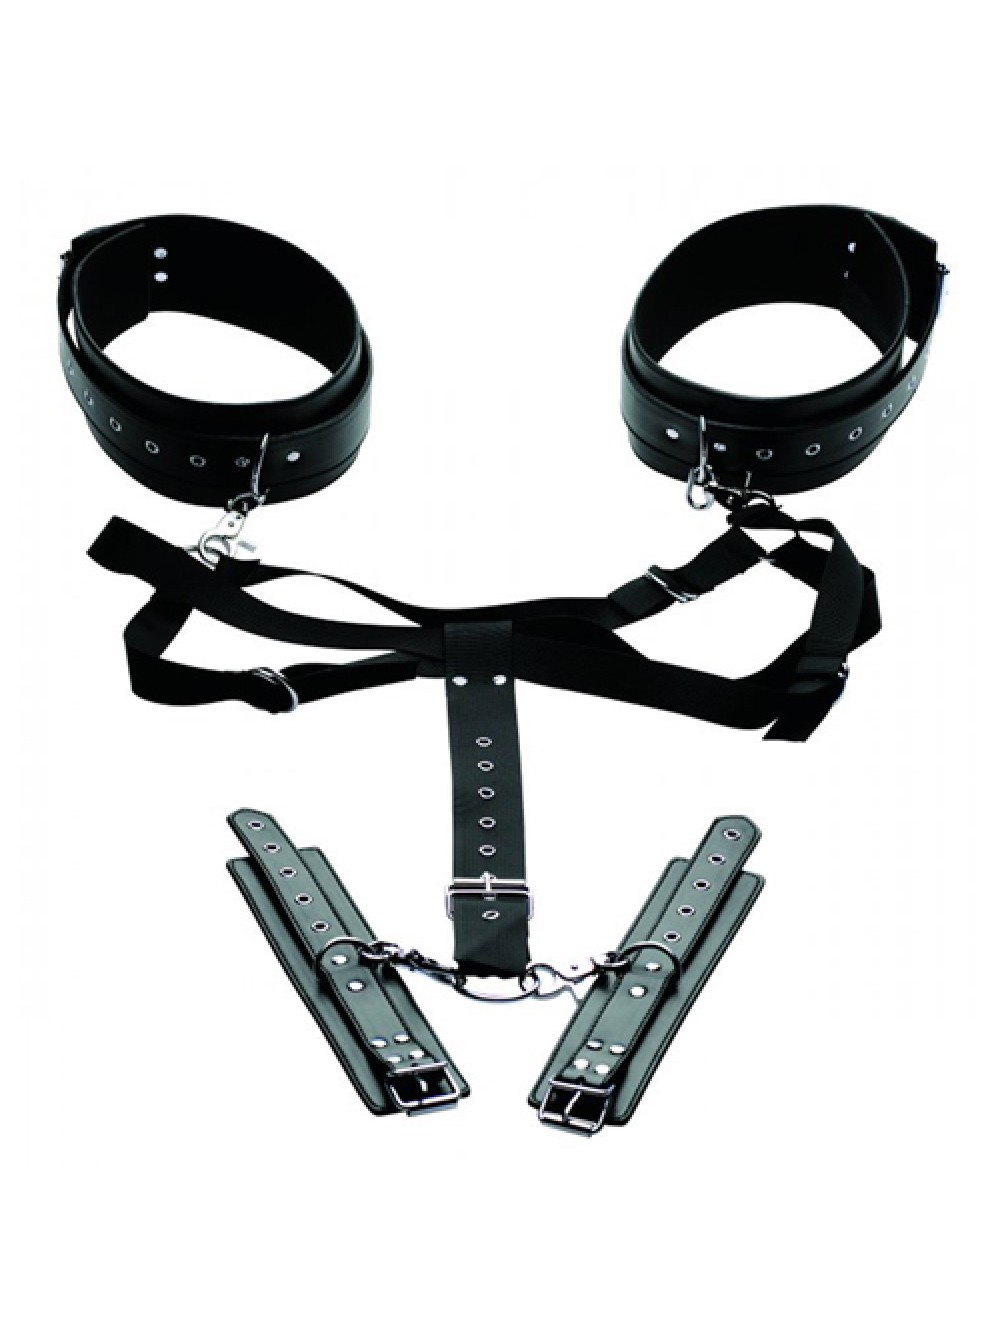 Acquire Easy Access Thigh Harness with Wrist Cuffs